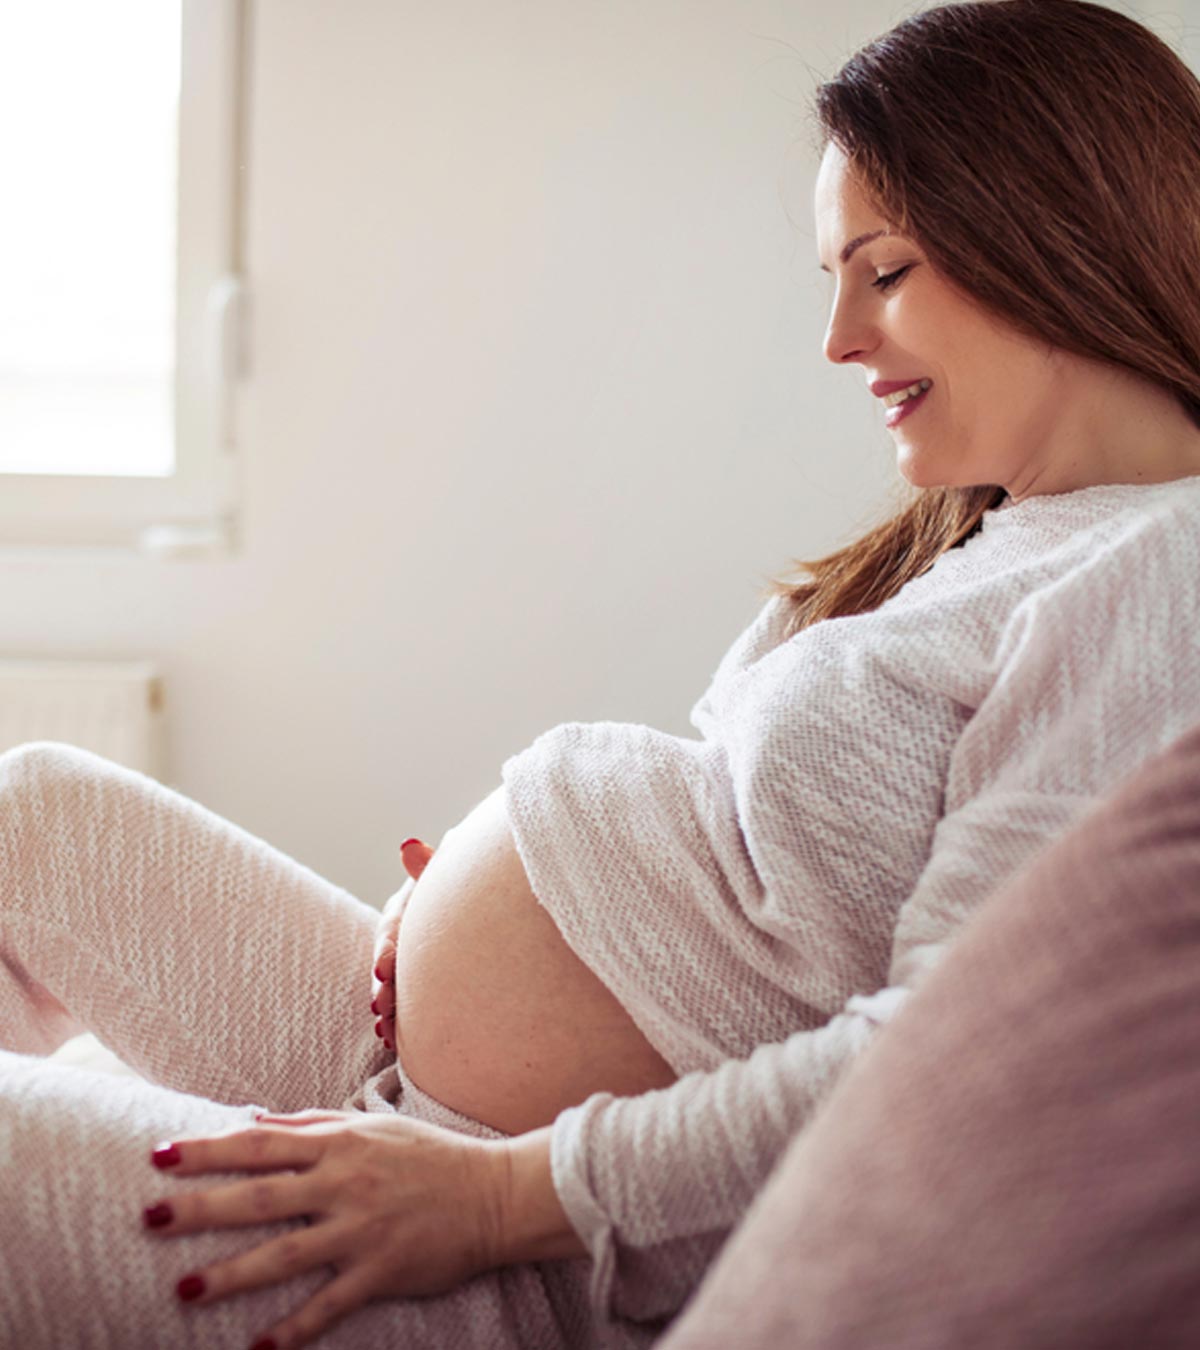 5 Risky Things Inside Your Home That Could Be Harmful During Pregnancy